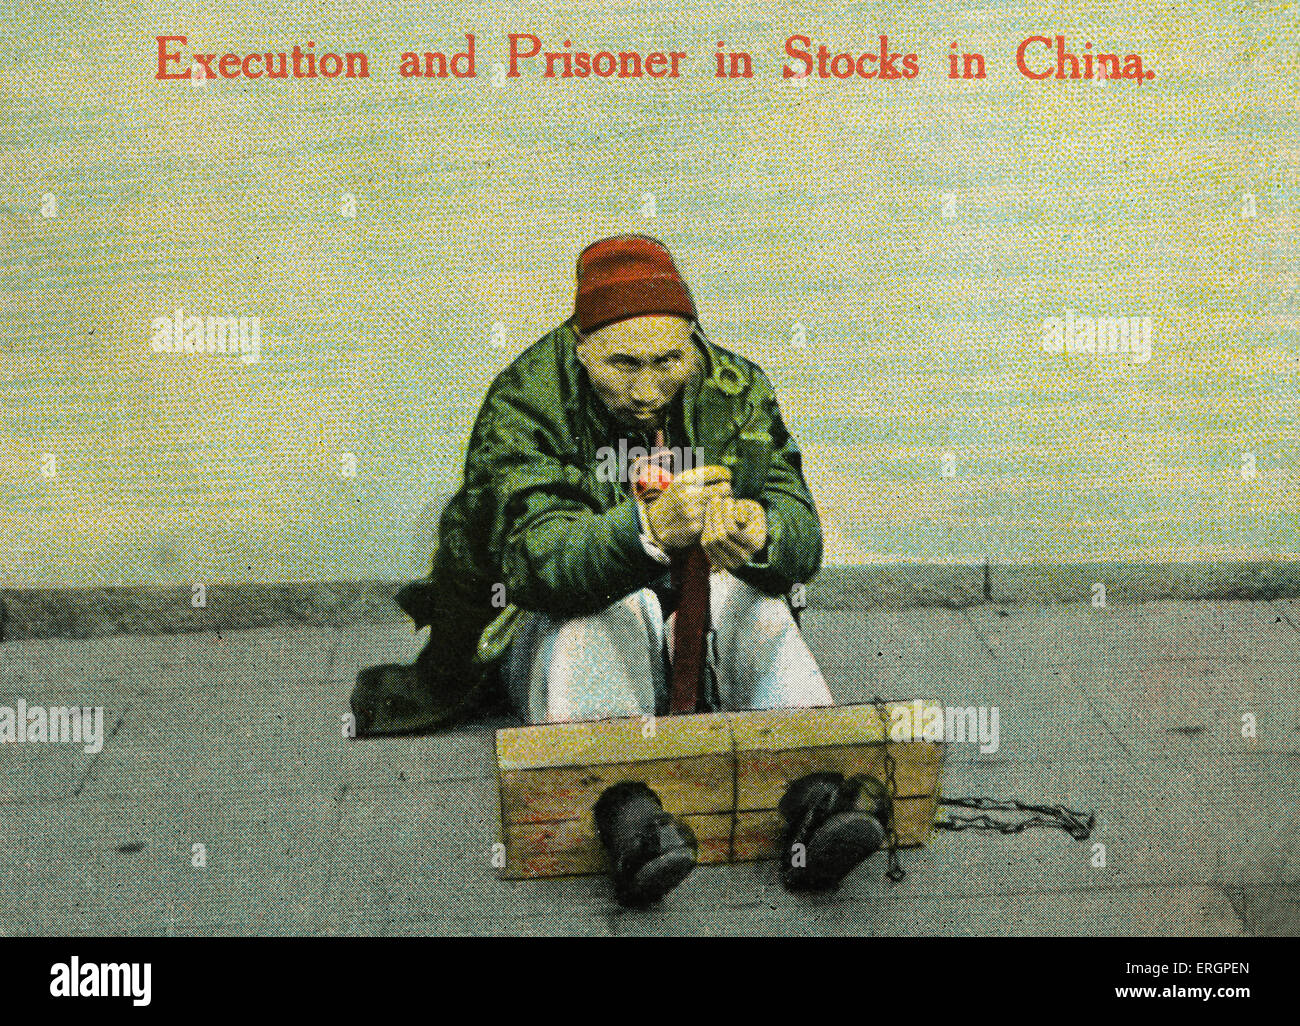 Male Muslim prisoner with  feet shackled to wooden stocks. China, early 20th century. Stock Photo